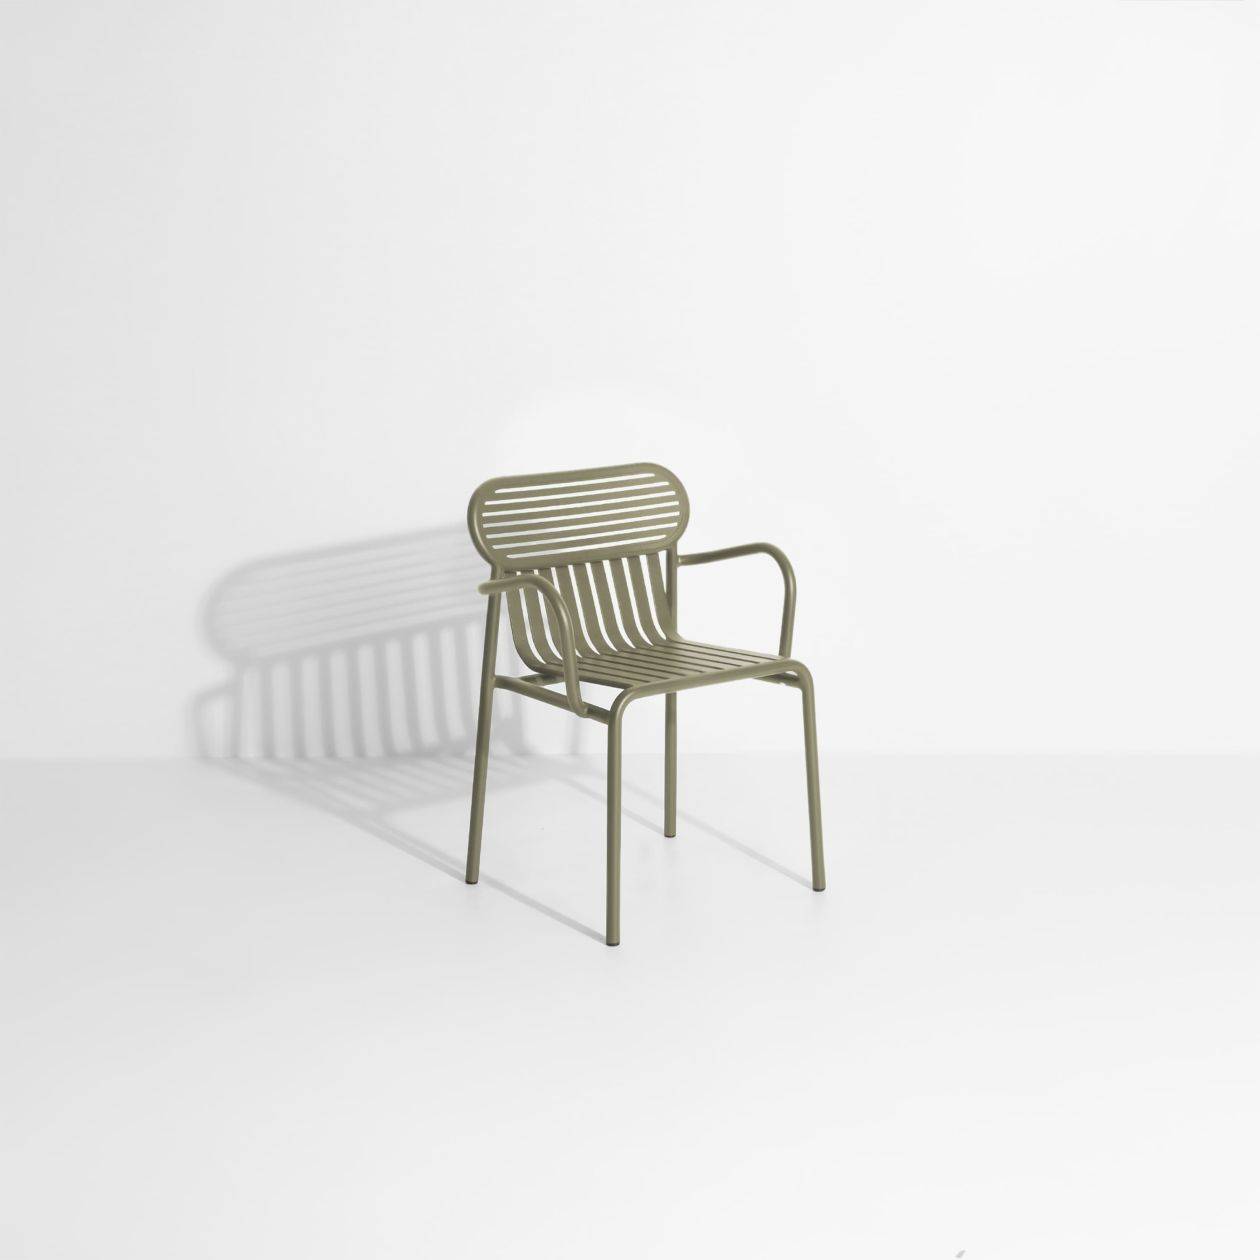 Week-End Garden Chair with armrests - Jade green